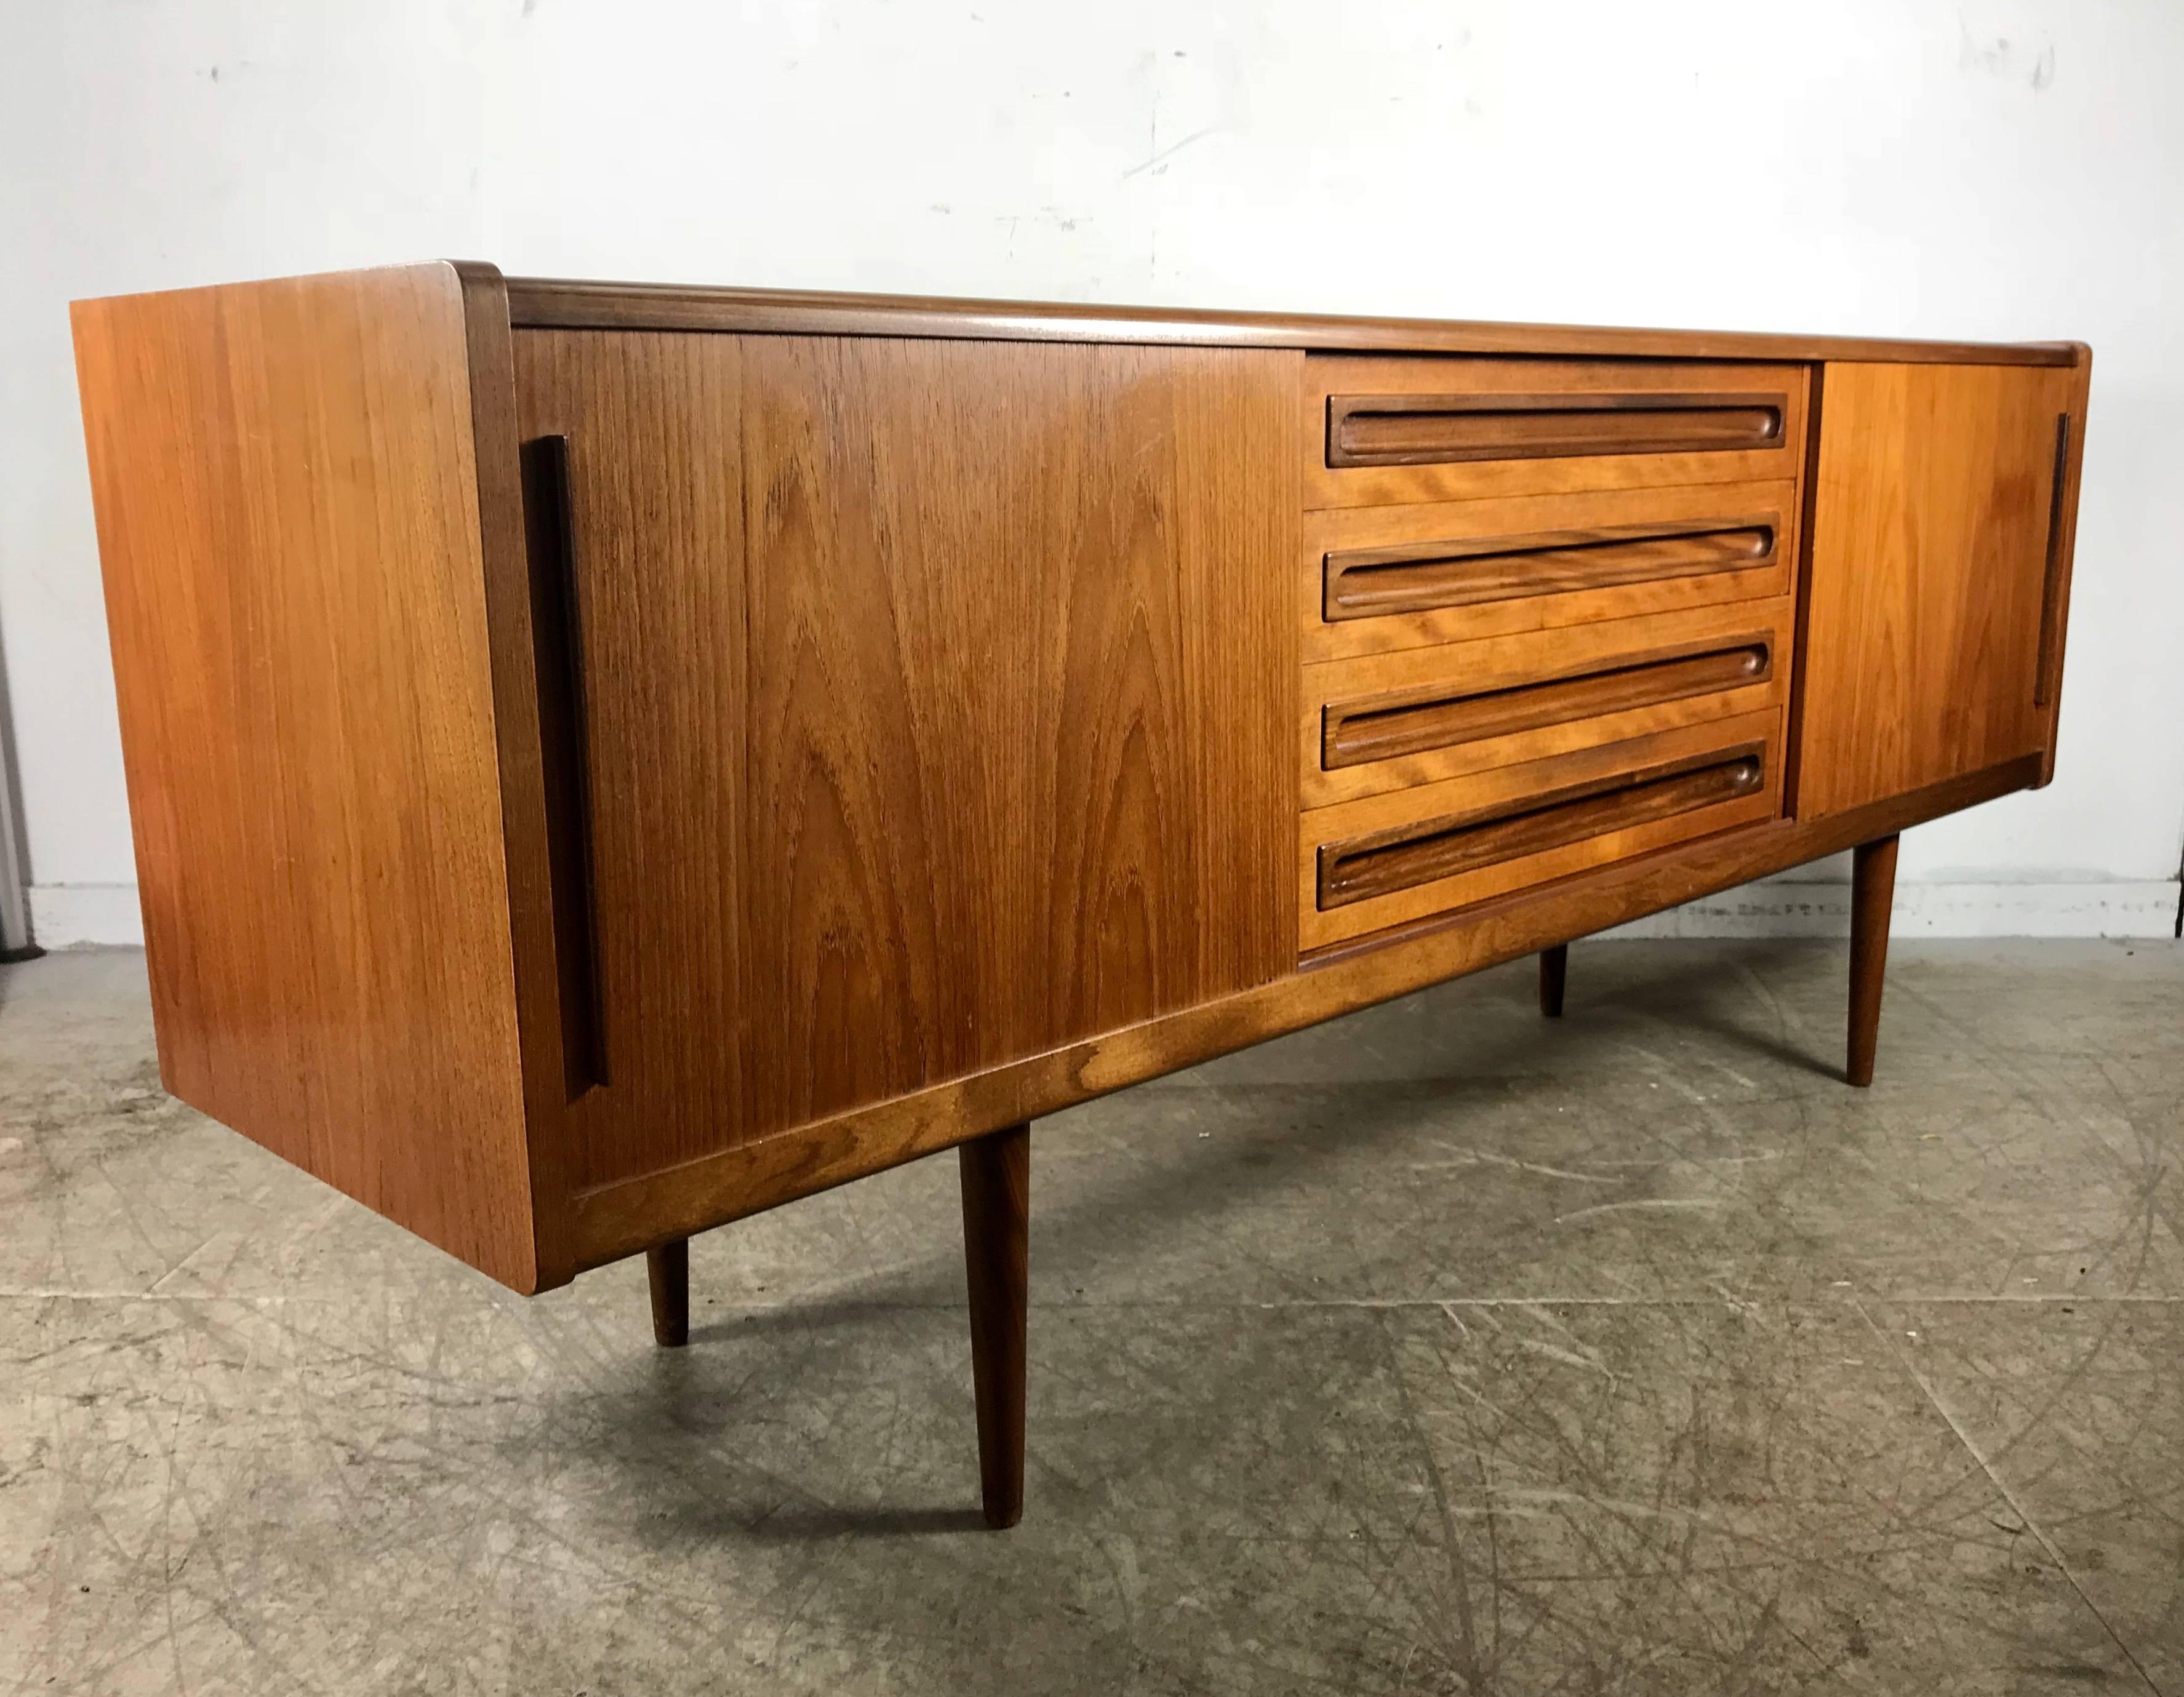 Two-Tone Teak Danish Modern Credenza Centre Drawers, Sliding Doors In Good Condition For Sale In Buffalo, NY